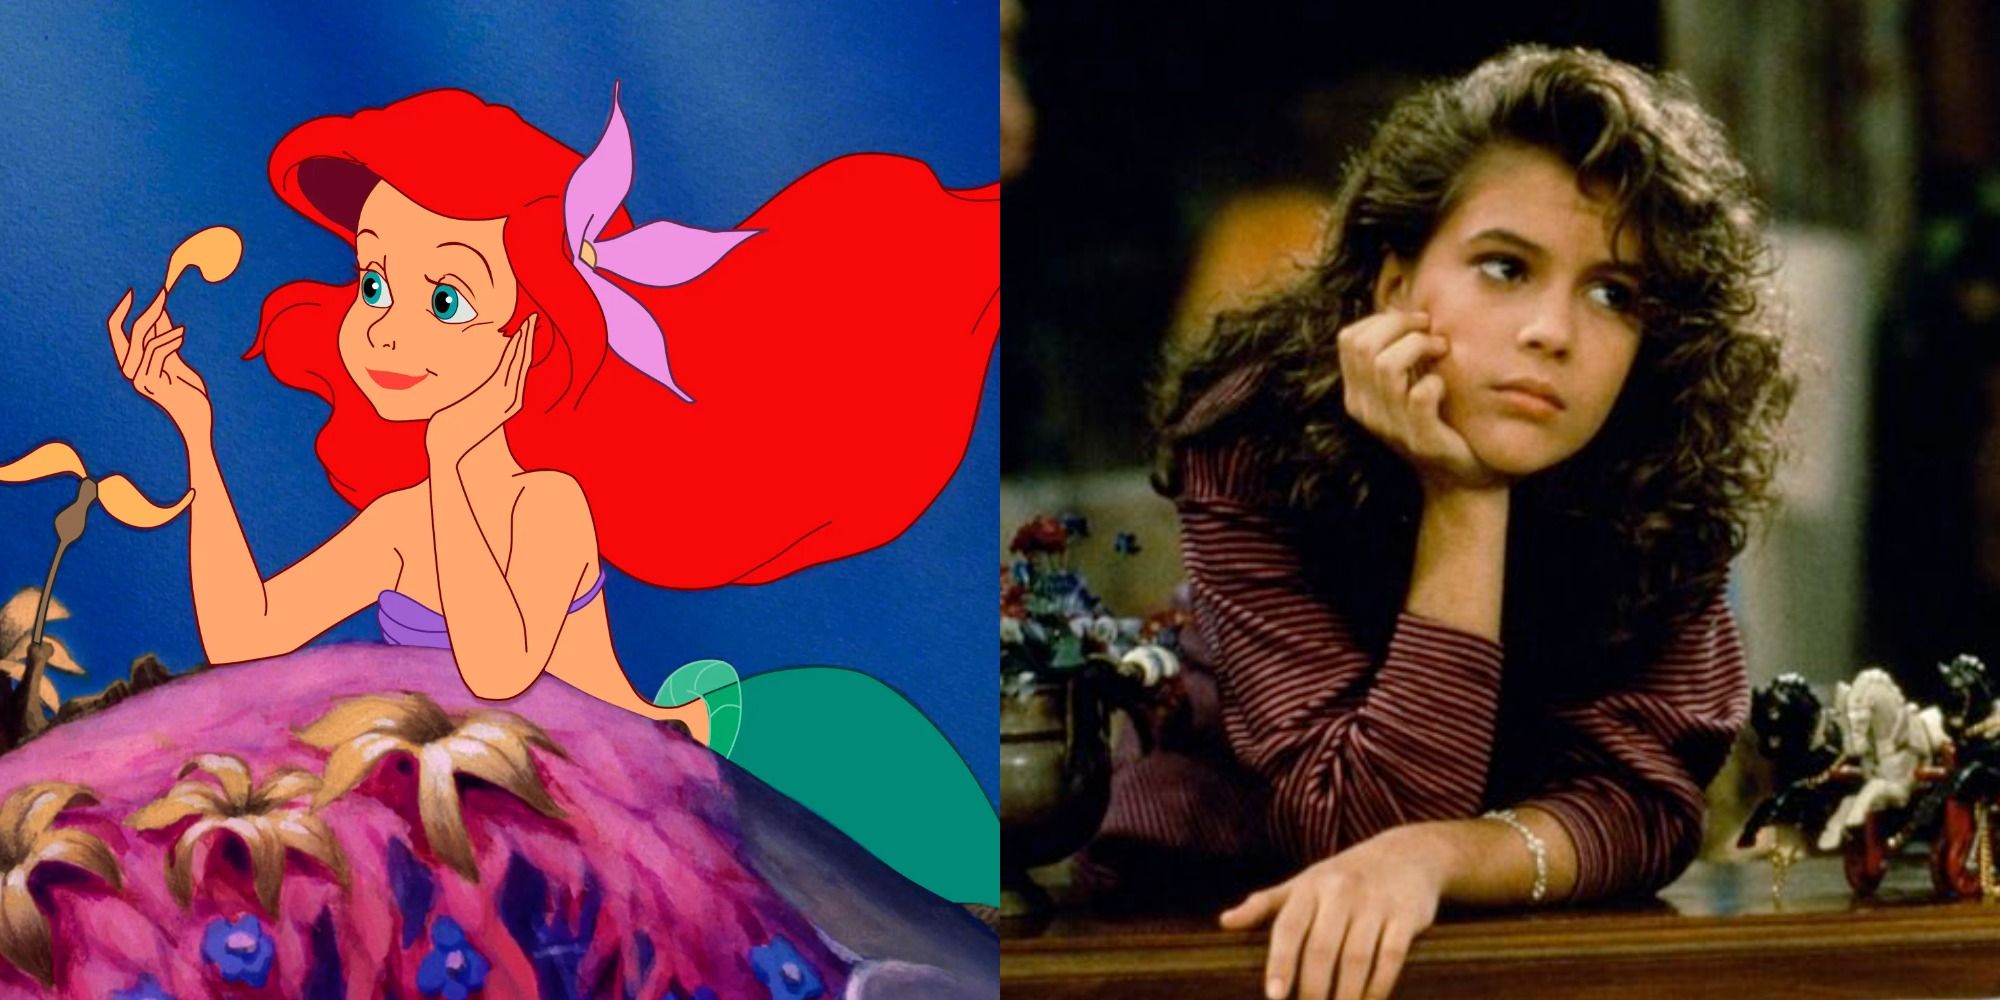 Side by side images of Ariel from The Little Mermaid and Alyssa Milano